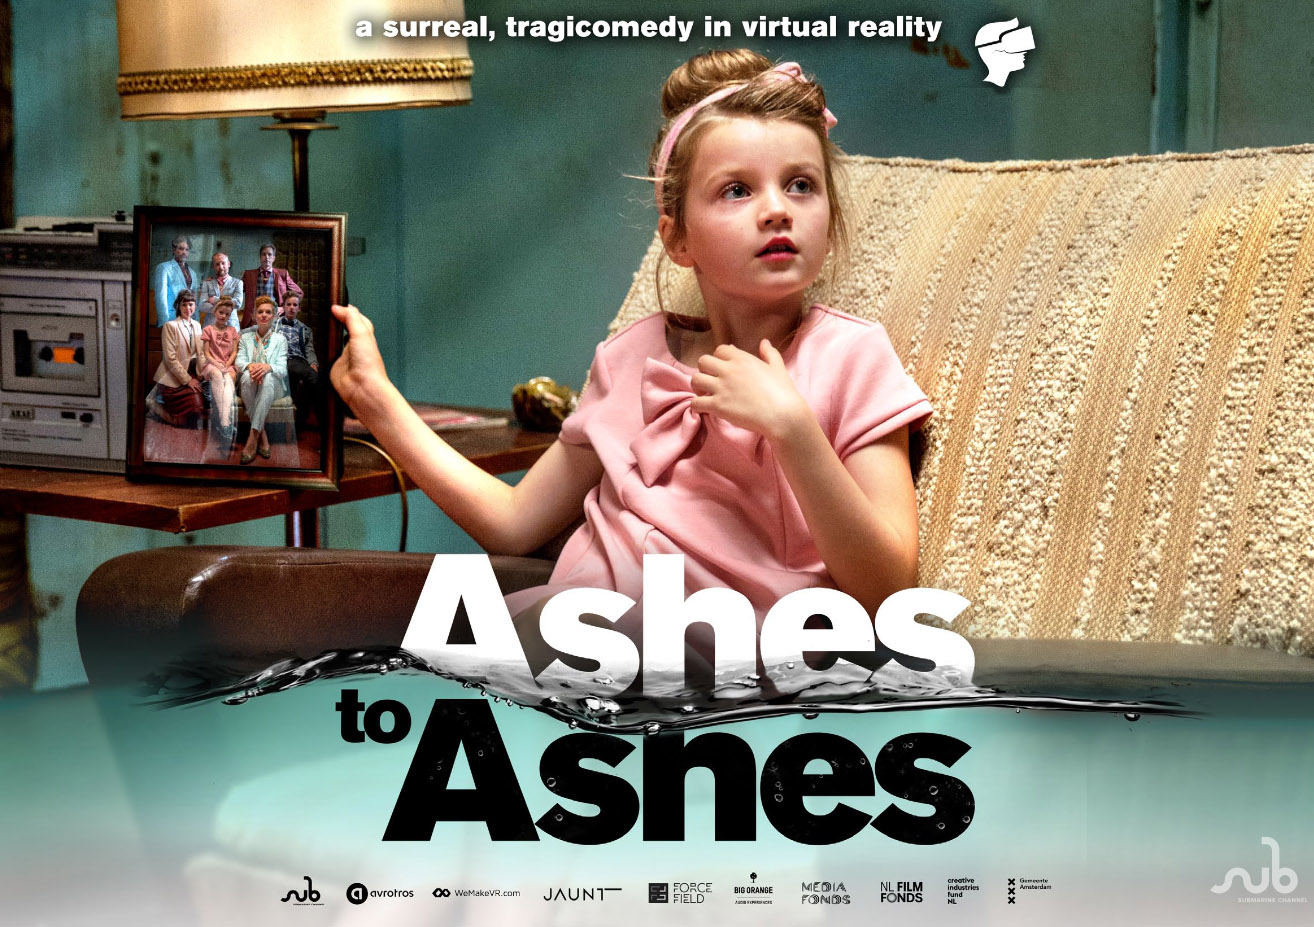 Ashes To Ashes (VR short movie) review